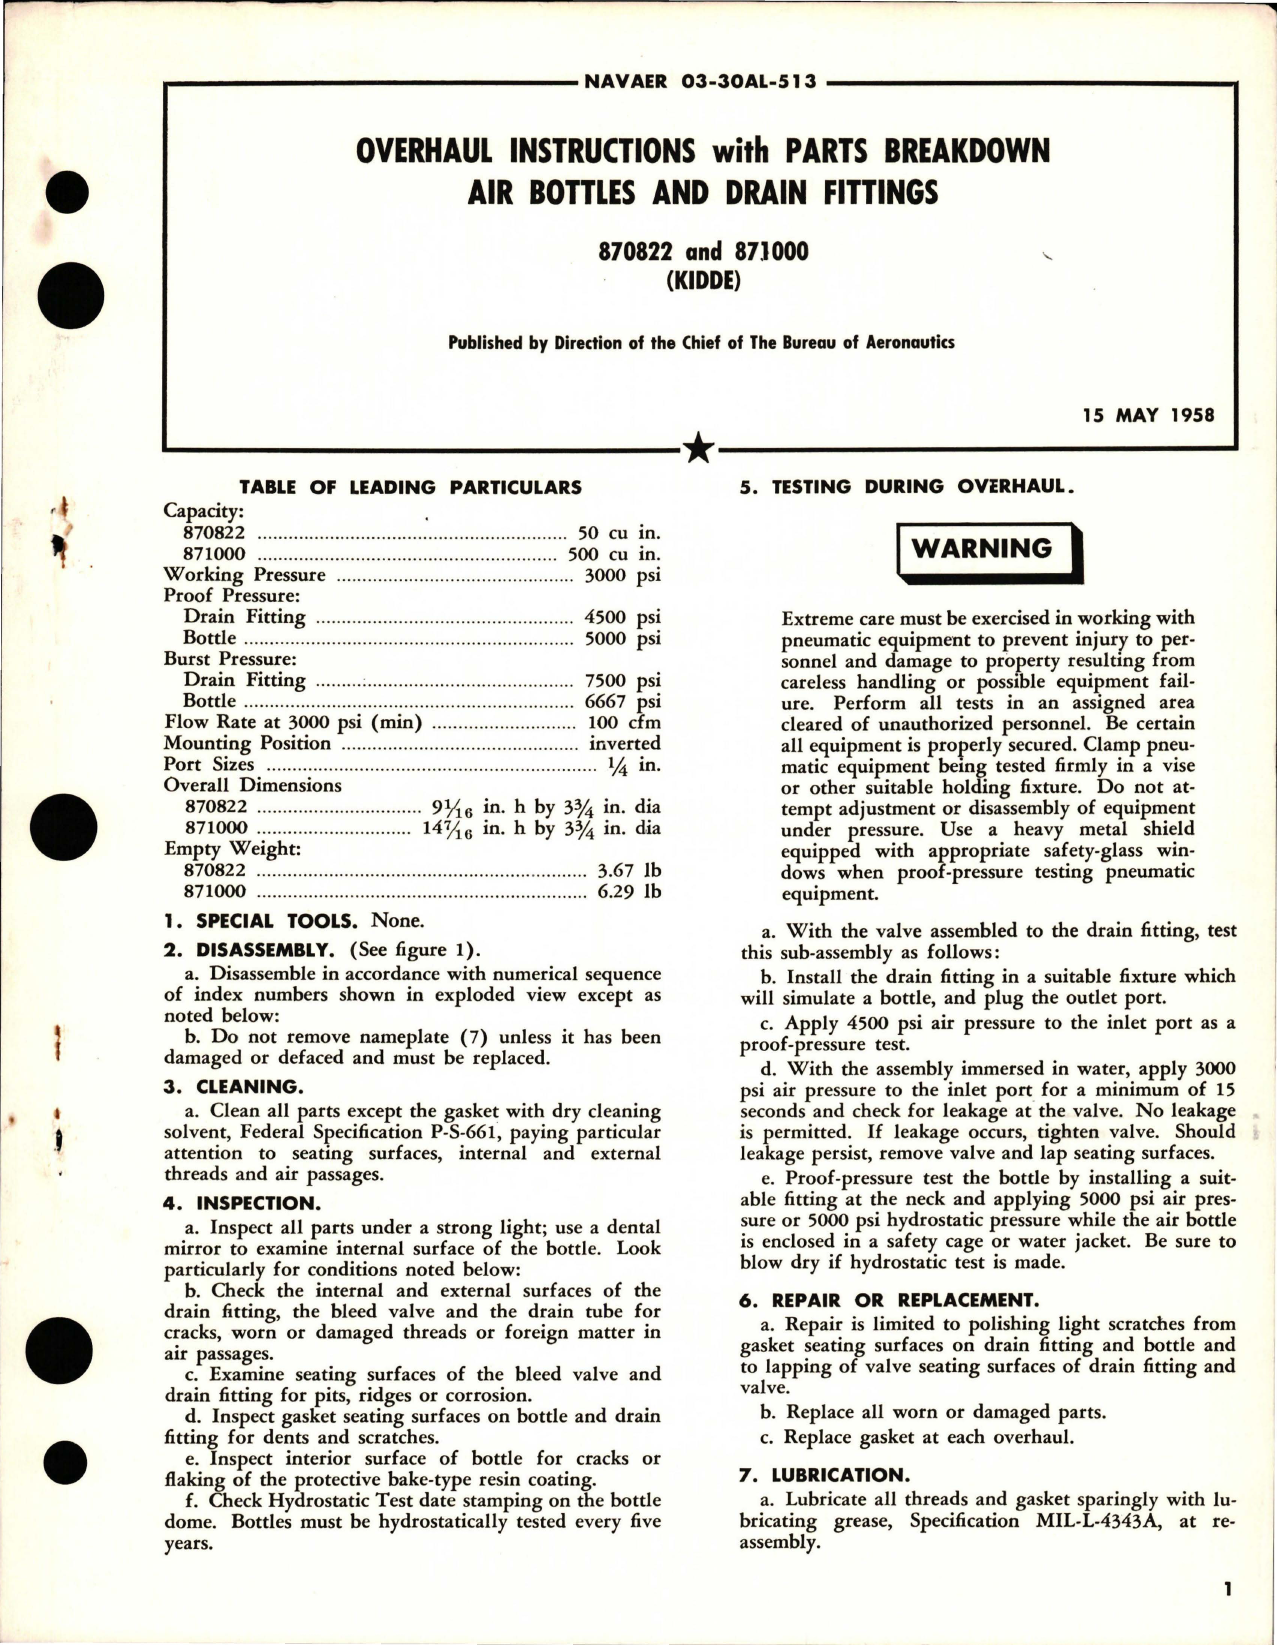 Sample page 1 from AirCorps Library document: Overhaul Instructions with Parts Breakdown for Air Bottles and Drain Fittings - 870822 and 871000